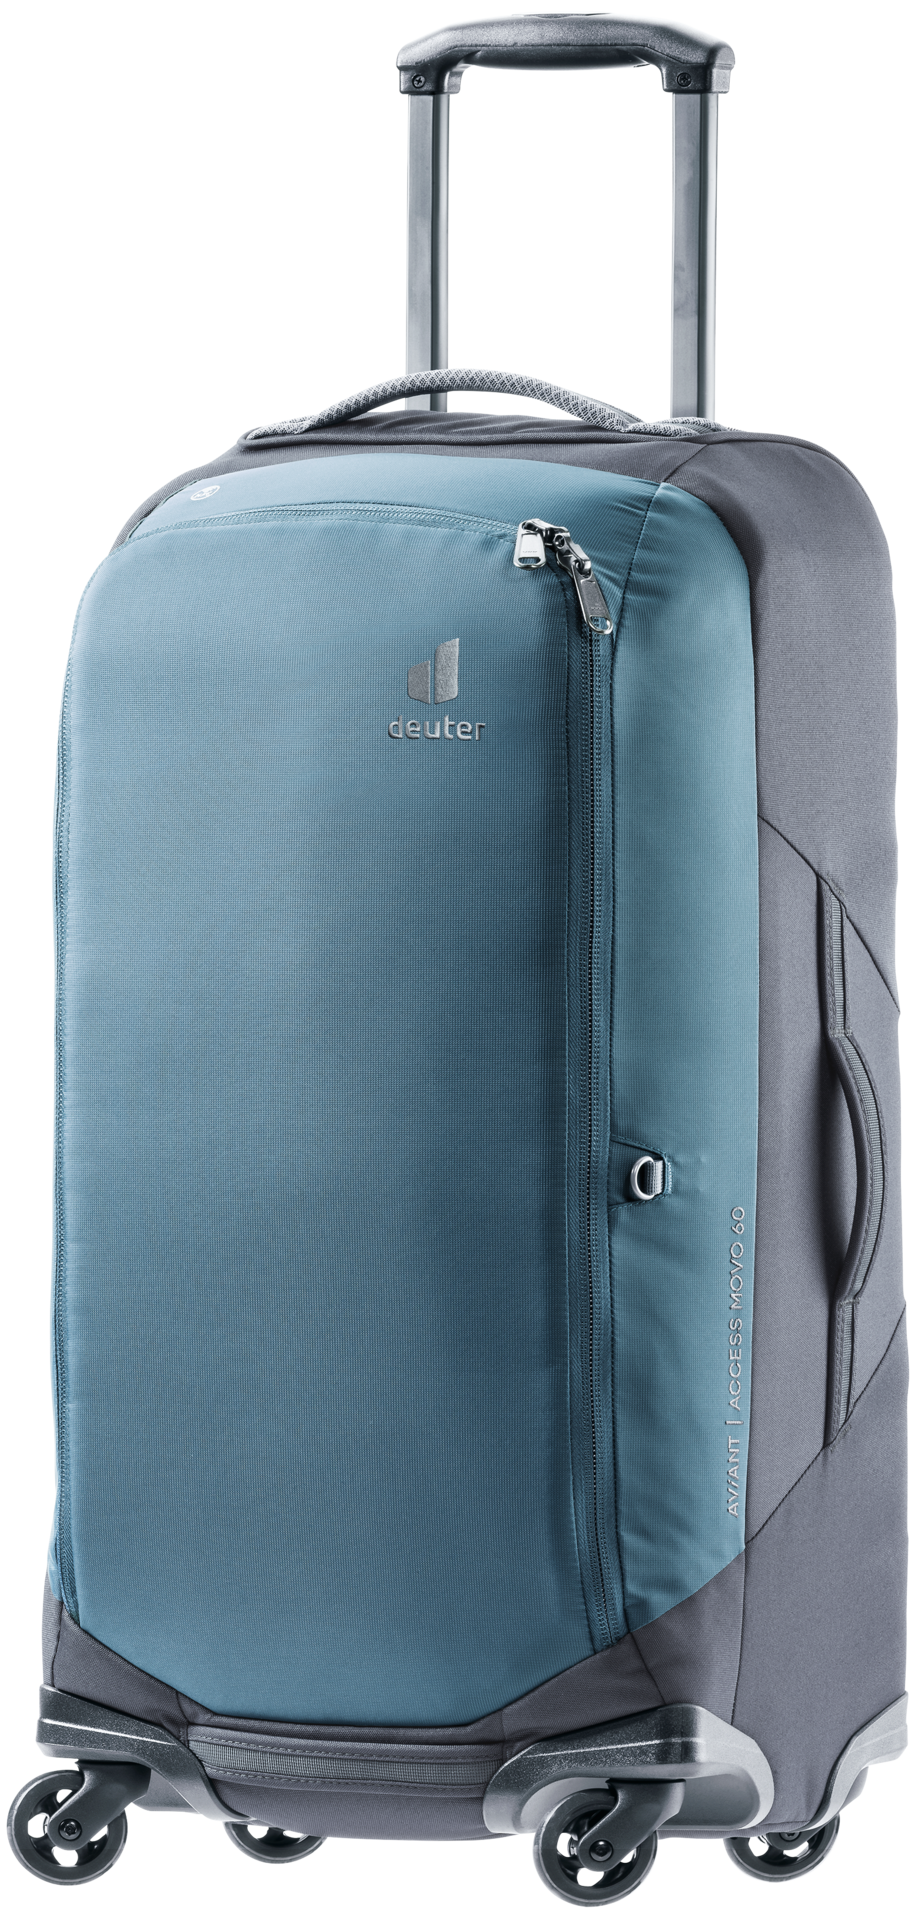 Deuter AViANT Access Movo Spinner Suitcases